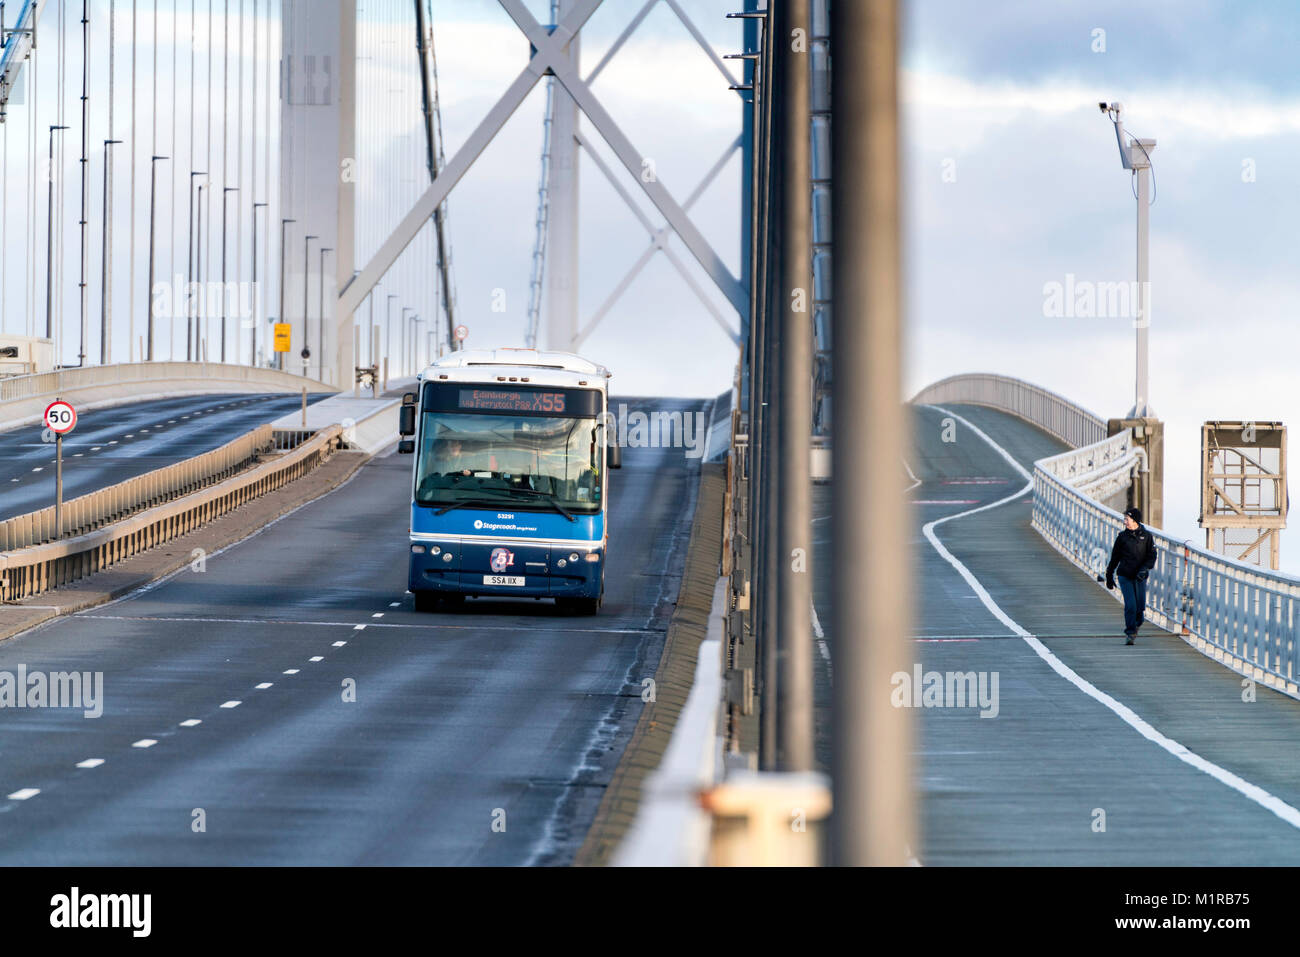 South Queensferry, Scotland, UK. 1st Feb, 2018. The Forth Road Bridge opened today as a dedicated public transport corridor giving bus and taxi passengers a direct and dedicated route towards Edinburgh. The reopened bridge also marks the launch of a new campaign, Fife in the Fast Lane , promoting public transport in Fife. Traffic flows  in the morning rush-hour was very low with the bridge appearing empty for long periods of time. Stock Photo